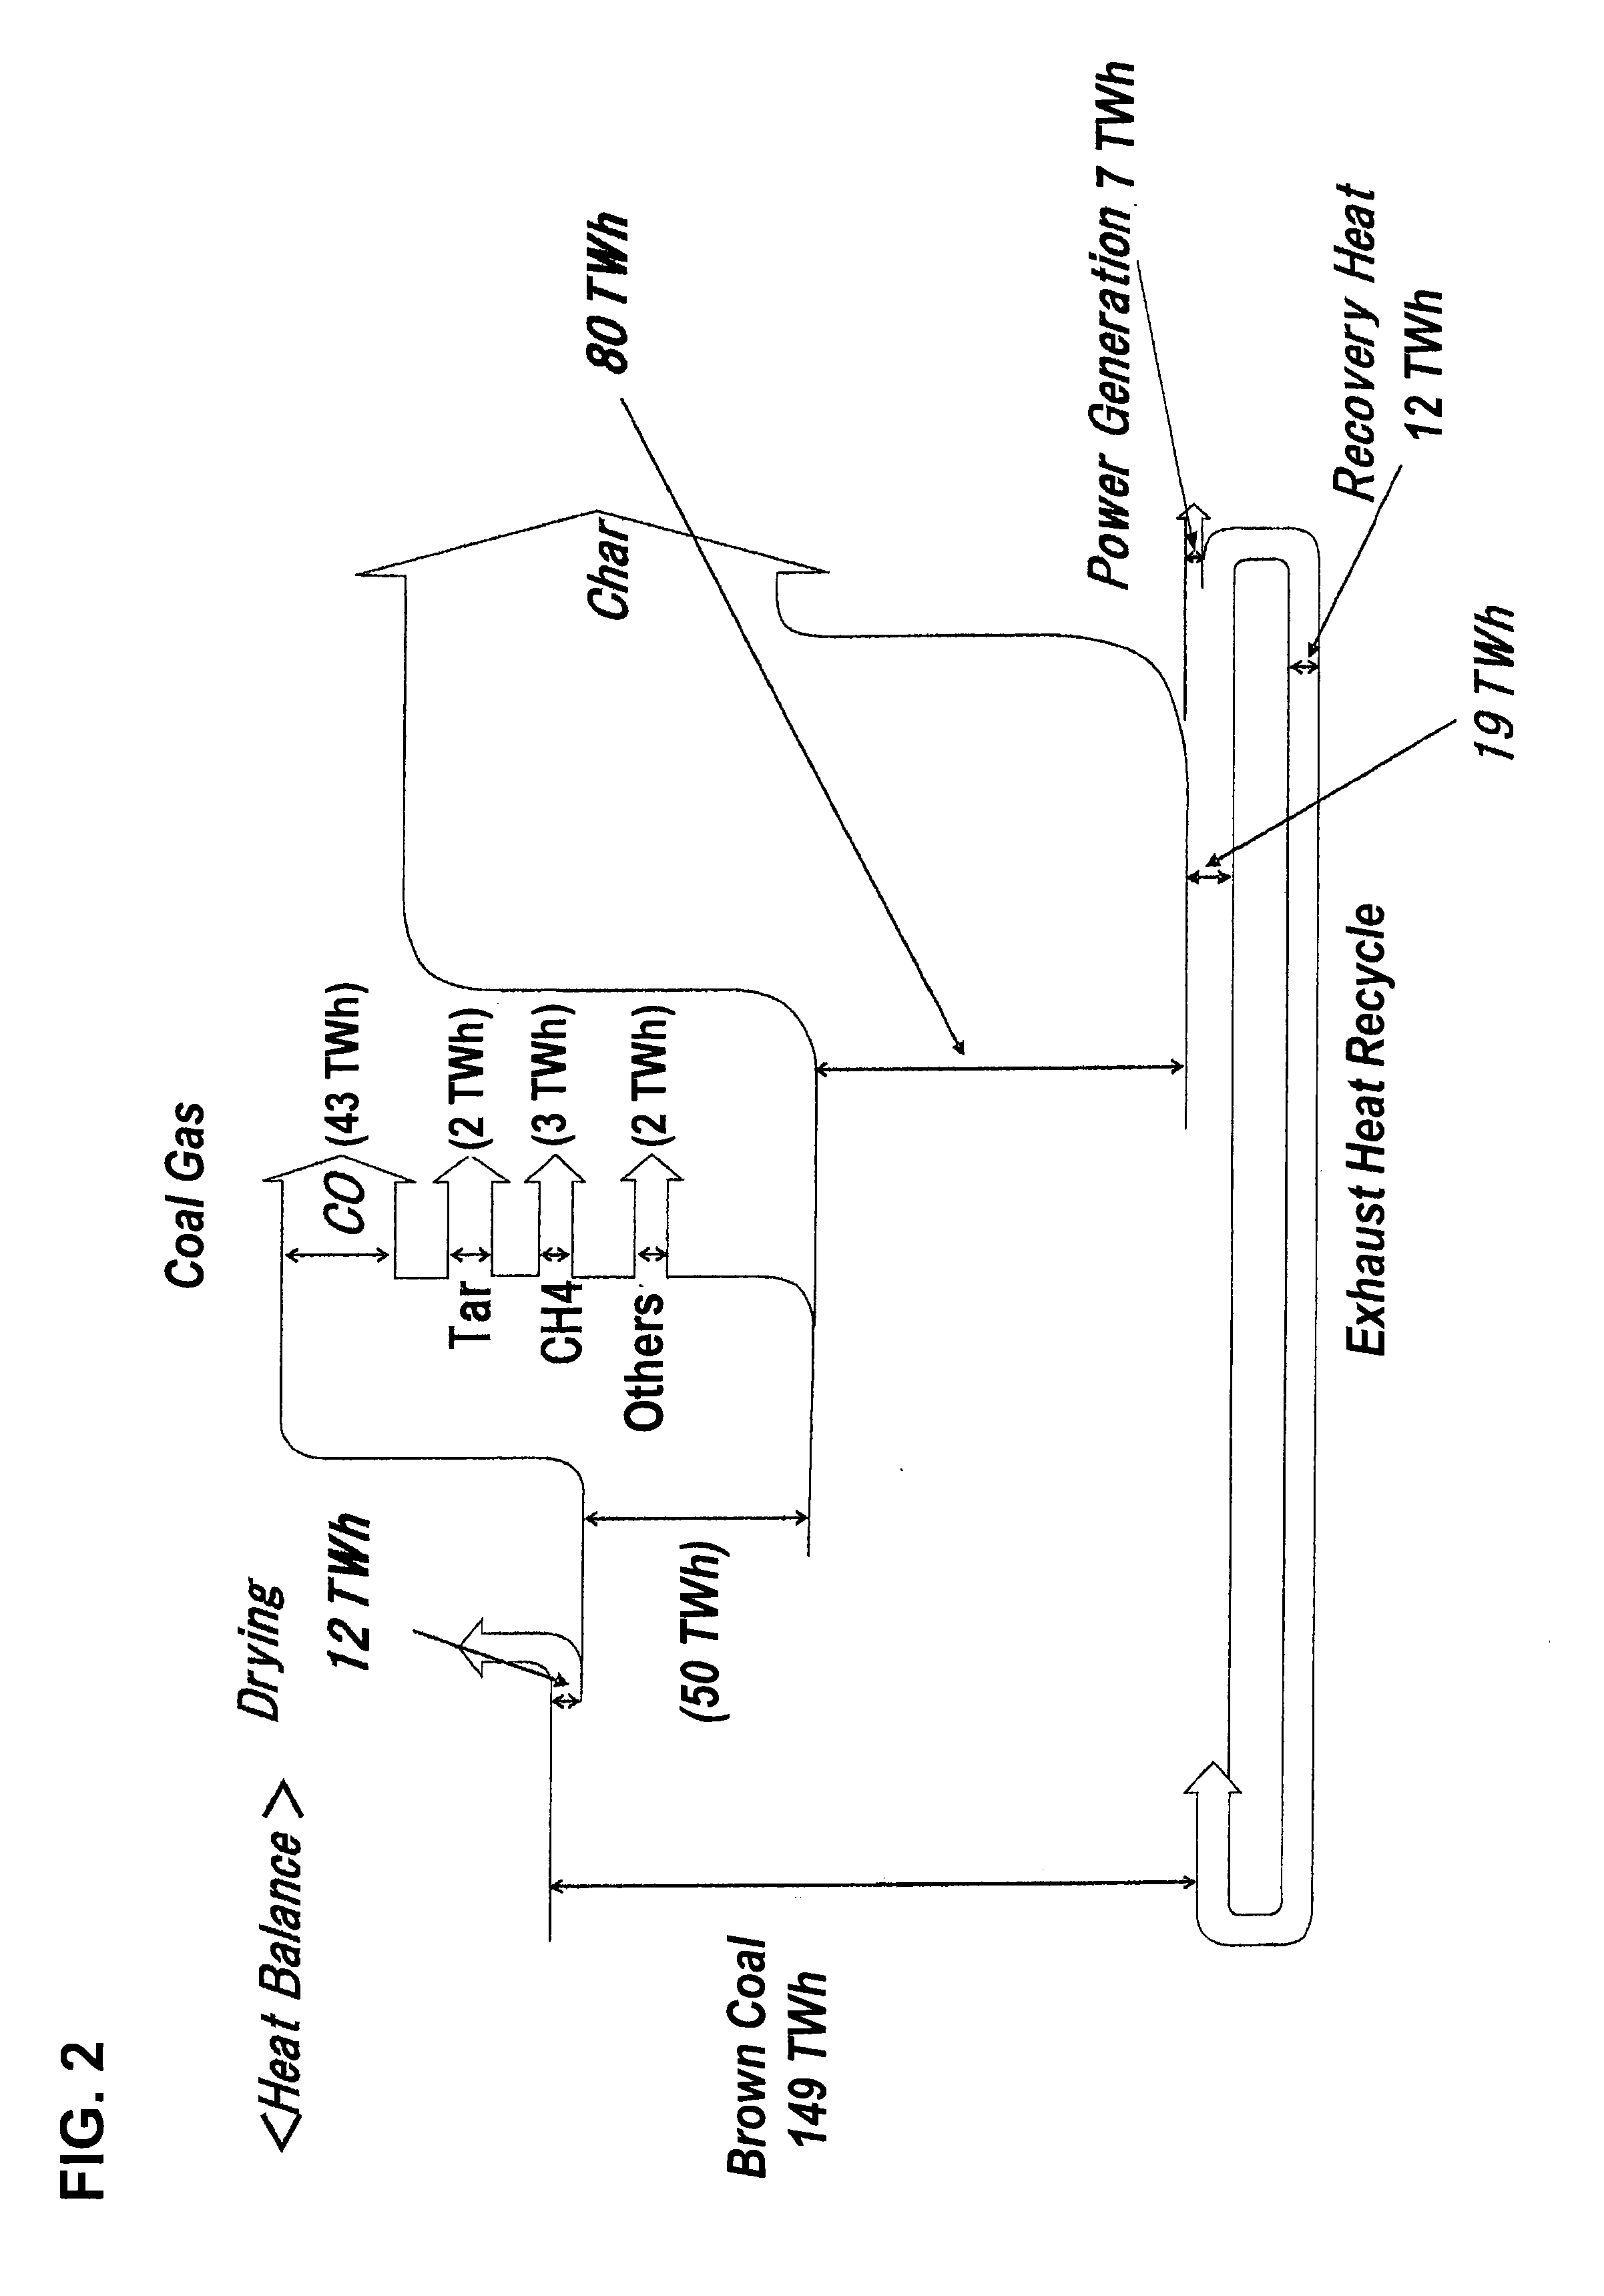 Complex system for utilizing coal in manufacture of char and raw material gas and electric power generation